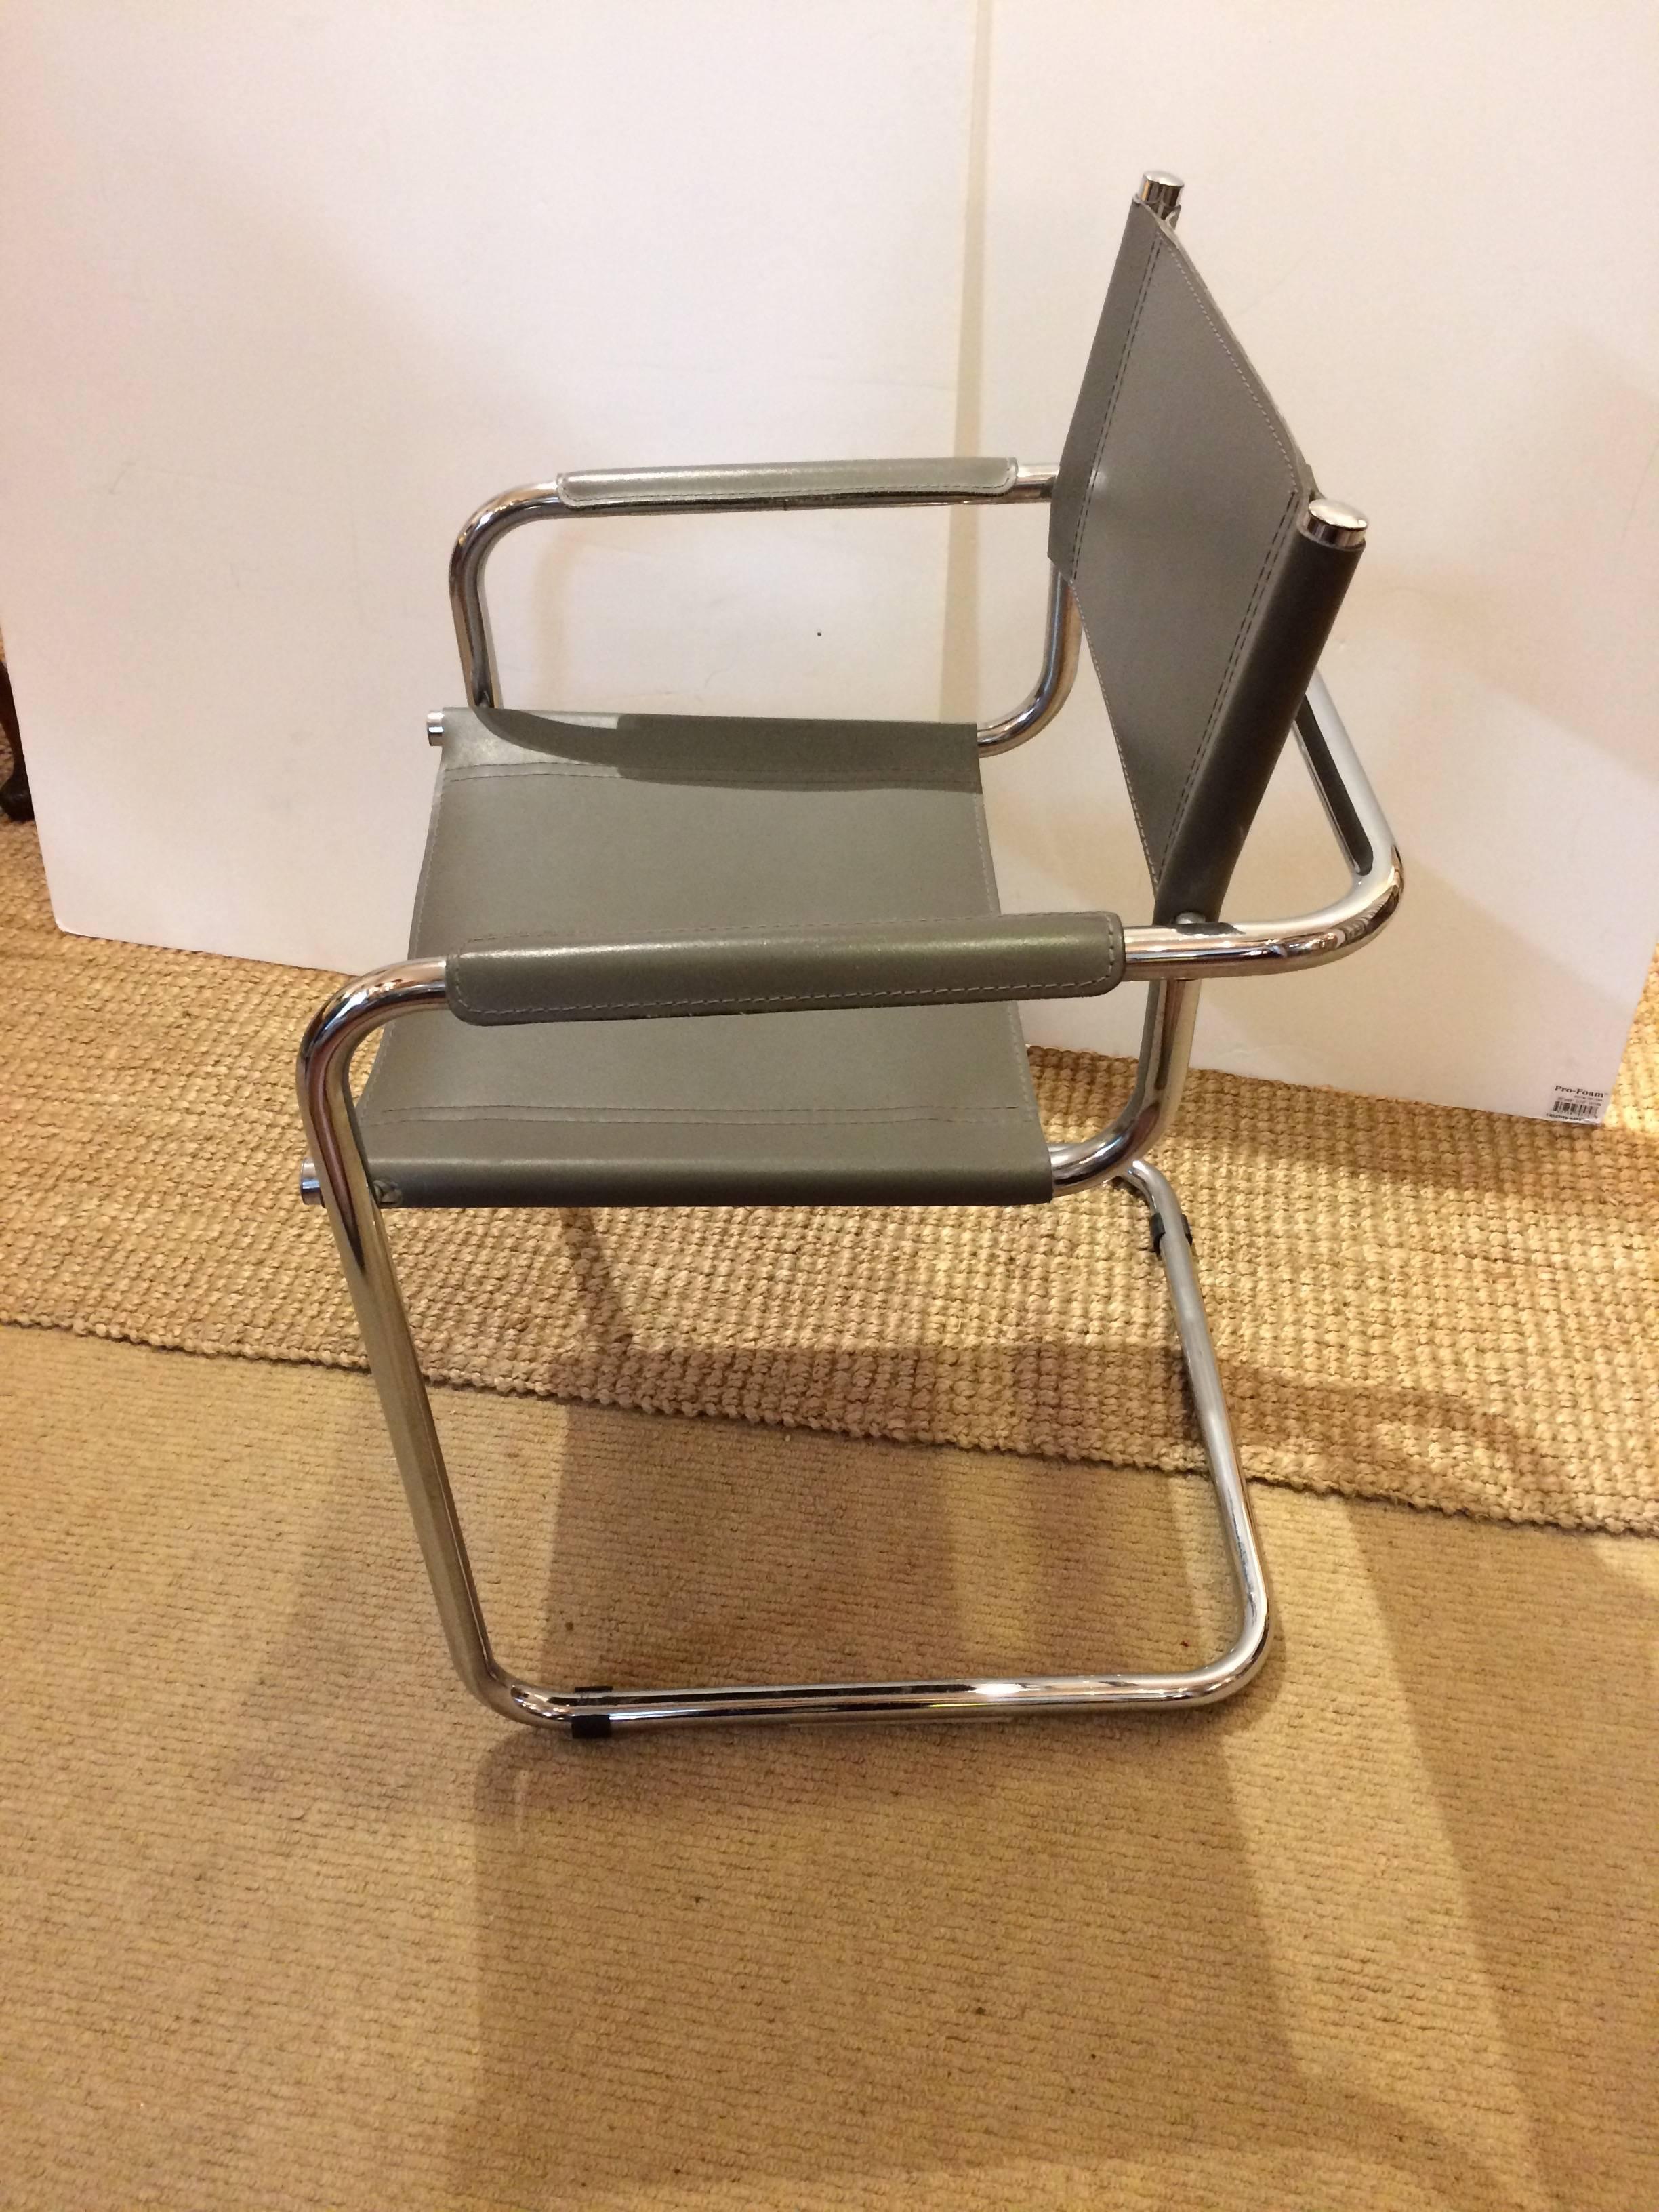 Four super cool Italian chrome and grey colored leather armchairs with a director's chair style. Great as dining chairs or living room too!
 